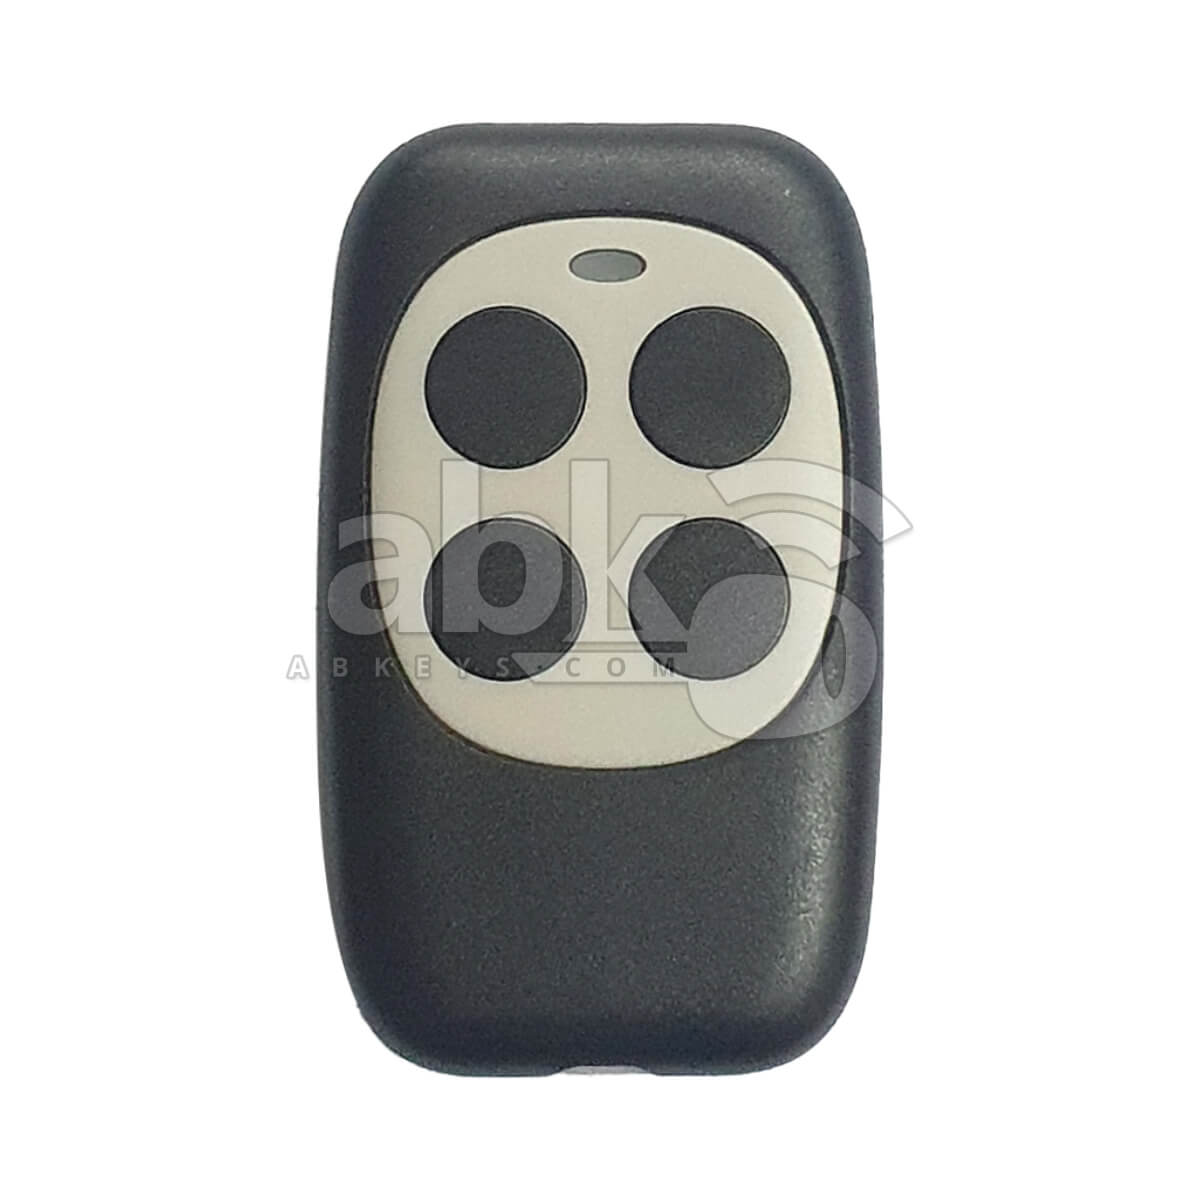 Universal Rolling Code & Fixed Code Remote With 4Buttons 433MHz Gray - ABK-634-GRAY - ABKEYS.COM